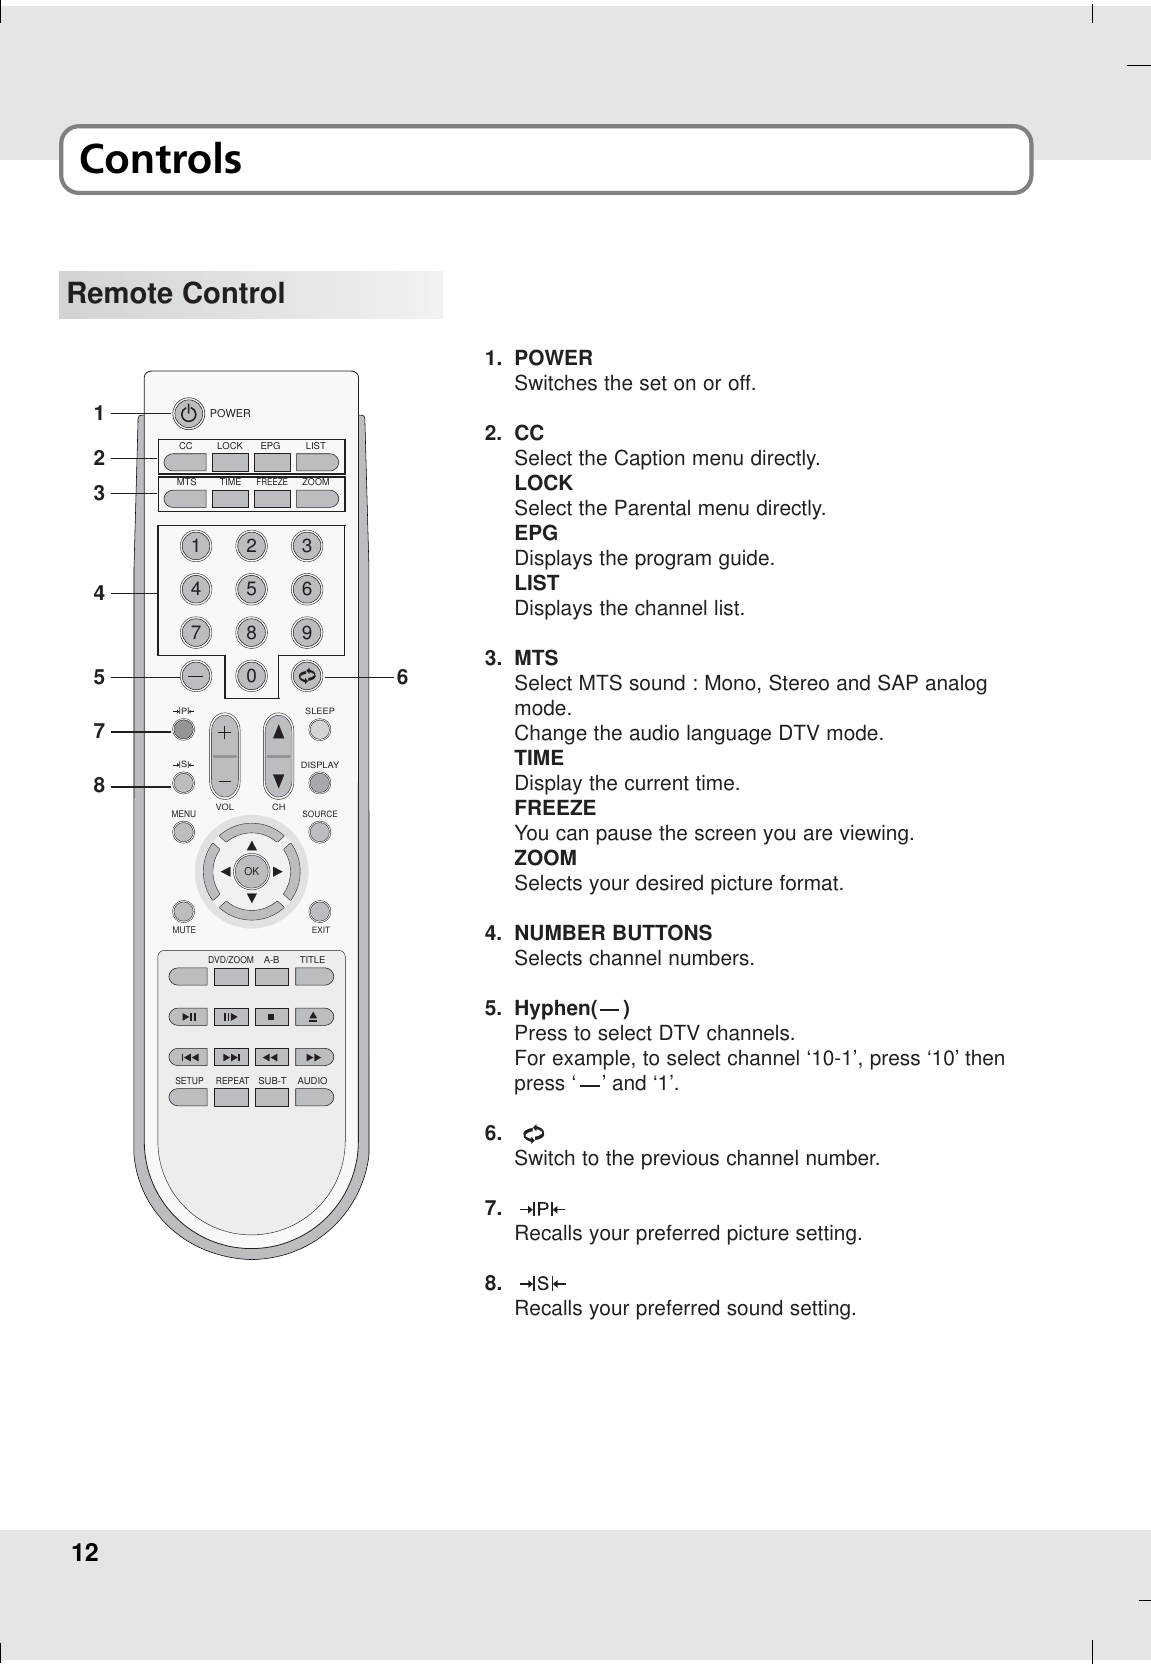 12ControlsRemote ControlIPISLEEPISIDISPLAYPOWERCCMTSTIMEFREEZEZOOMLOCK EPG LIST1472580396MENUSOURCEMUTEEXITVOL CHOKDVD/ZOOMA-B TITLESETUP REPEATSUB-T AUDIO1. POWERSwitches the set on or off.2. CCSelect the Caption menu directly.LOCKSelect the Parental menu directly.EPGDisplays the program guide.LISTDisplays the channel list.3. MTSSelect MTS sound : Mono, Stereo and SAP analogmode.Change the audio language DTV mode.TIMEDisplay the current time.FREEZEYou can pause the screen you are viewing. ZOOMSelects your desired picture format.4. NUMBER BUTTONSSelects channel numbers.5. Hyphen(    )Press to select DTV channels. For example, to select channel ‘10-1’, press ‘10’ thenpress ‘    ’ and ‘1’.6. Switch to the previous channel number.7. Recalls your preferred picture setting.8. Recalls your preferred sound setting.1234785 6